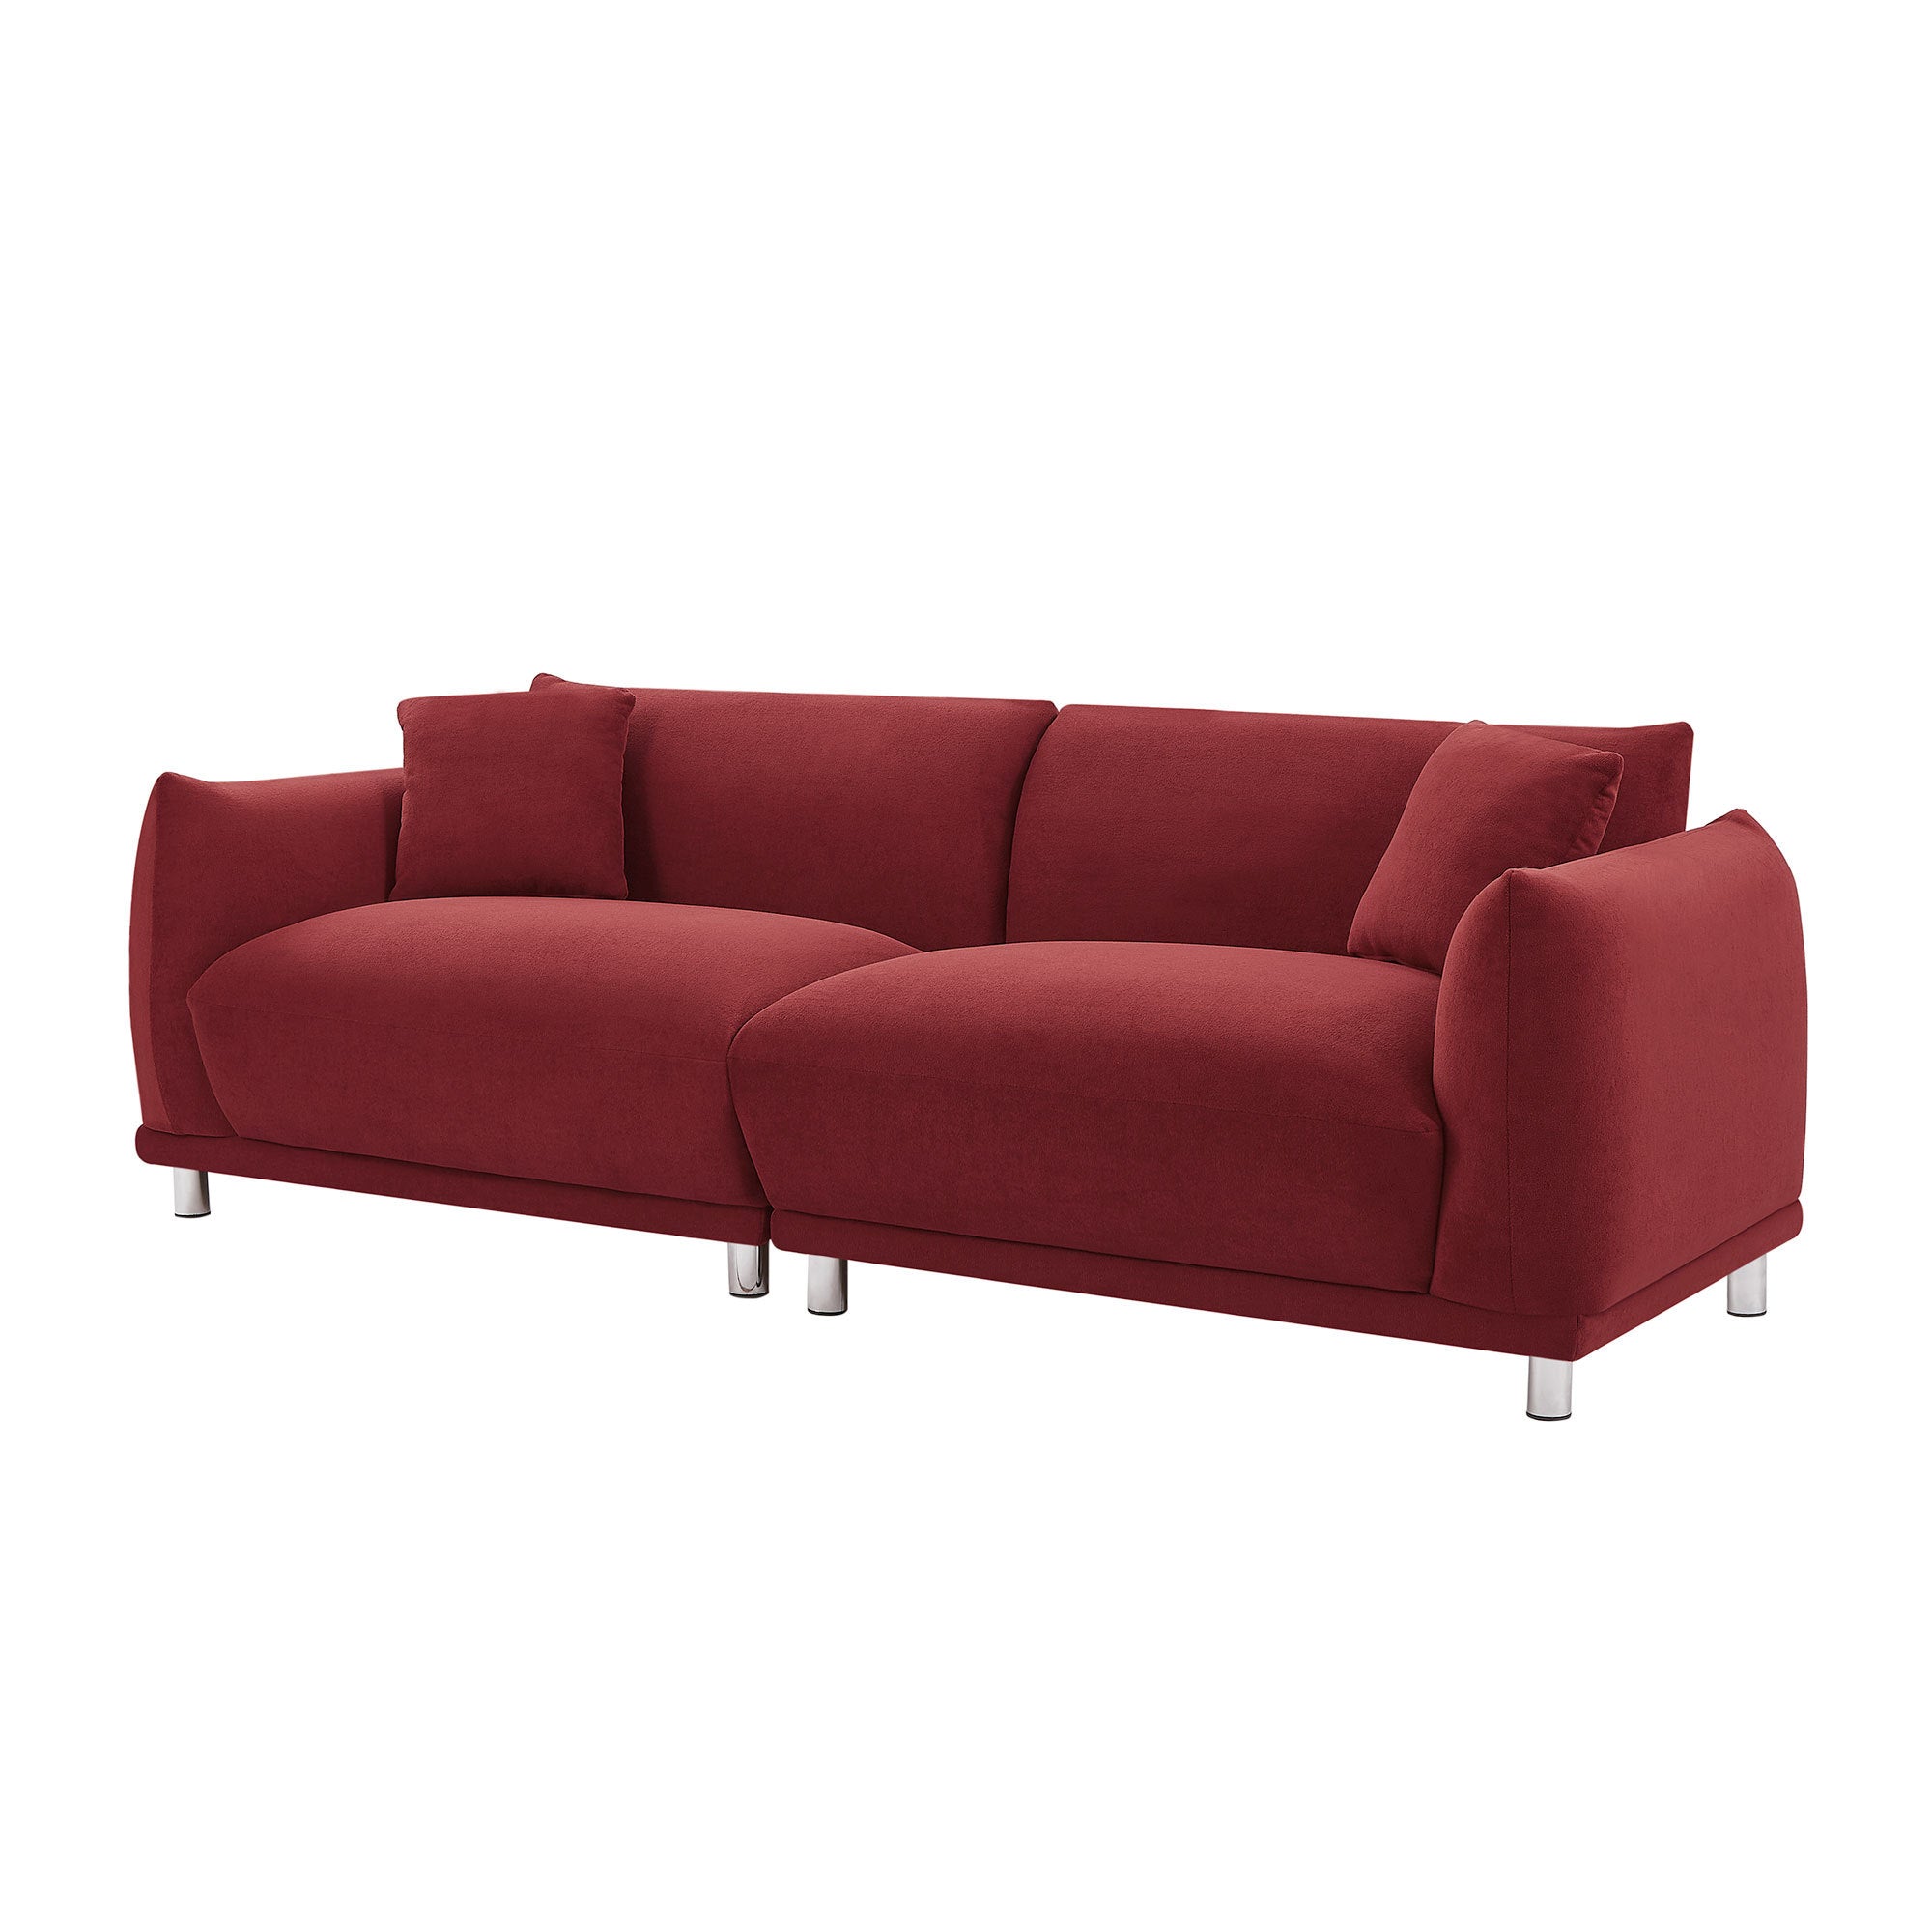 🆓🚛 Loveseat Sofa Couch for Modern Living Room, 2 Seater Sofa for Small Detachable Sofa Cover Space Spring Cushion & Solid Wood Frame, Red